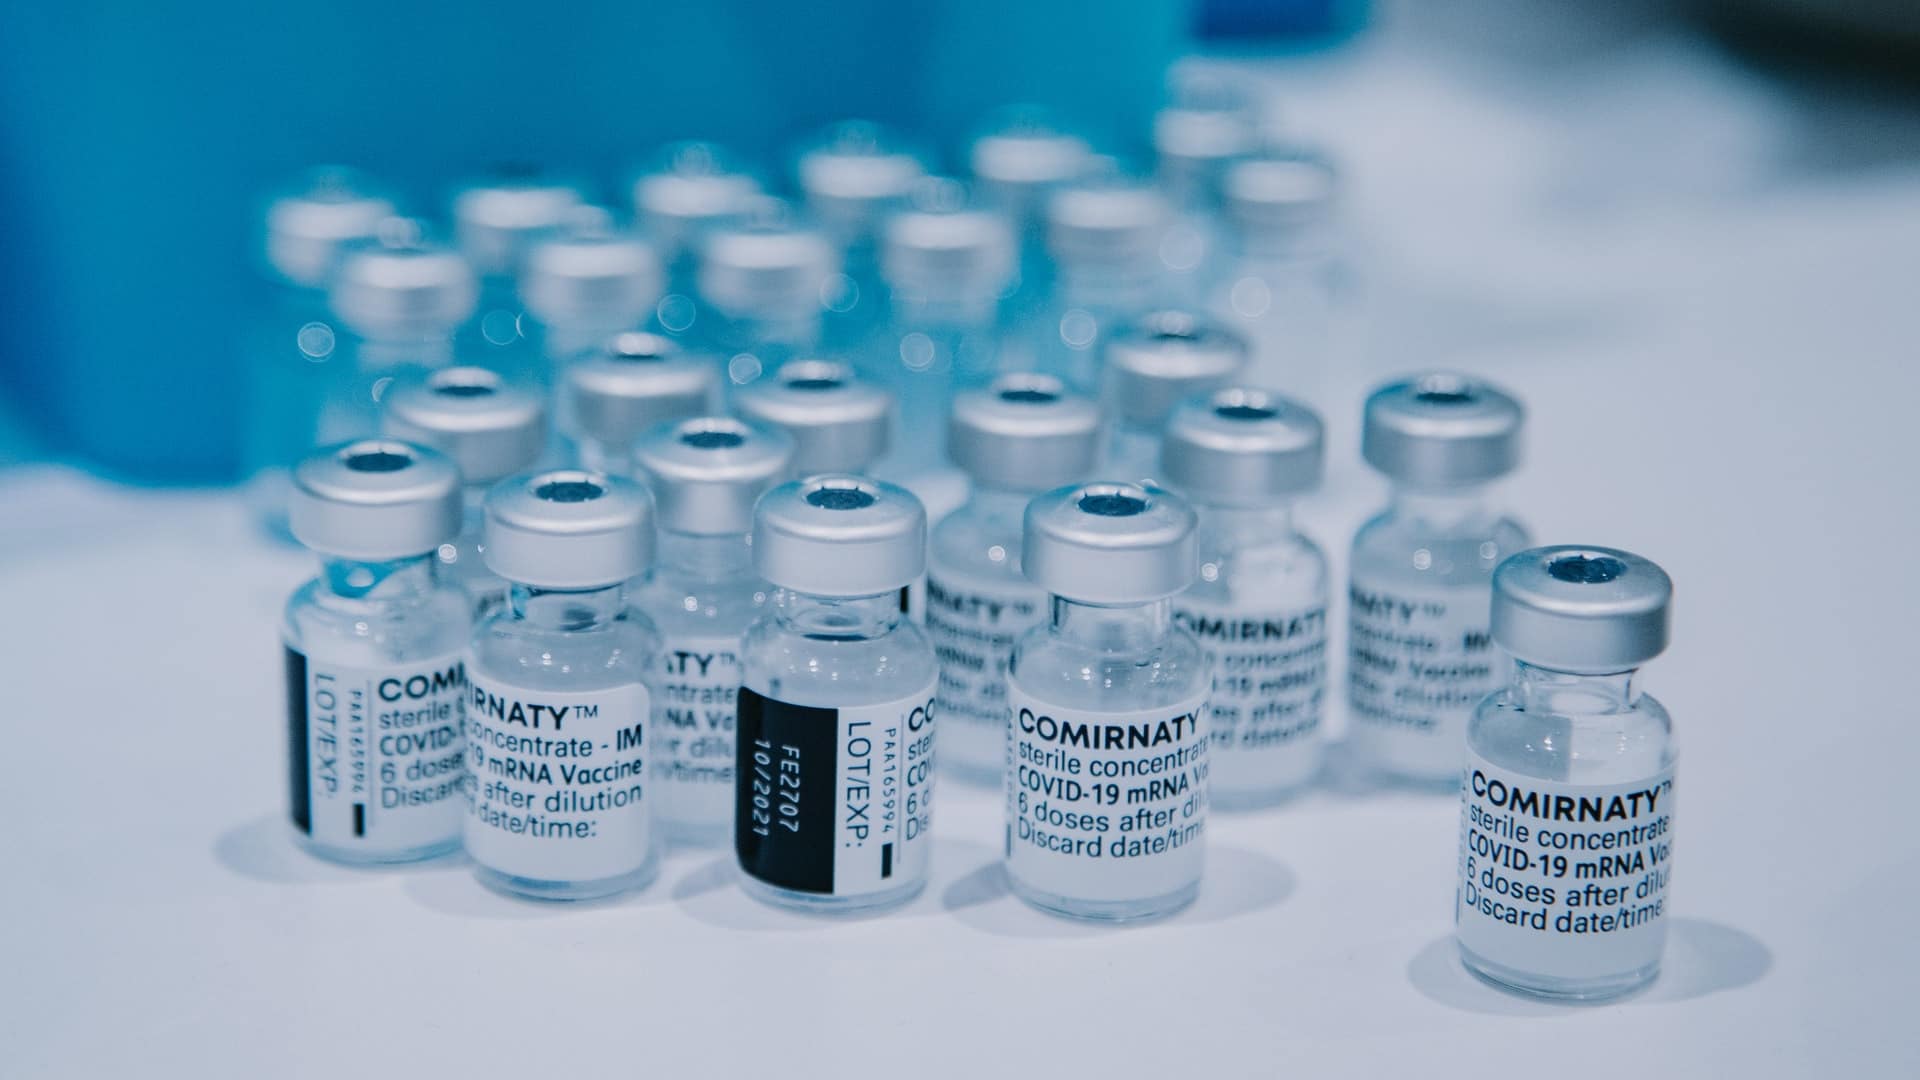 A collection of vials of the Pfizer/BioNTech Covid-19 vaccine, with the brand name Comirnaty visible.